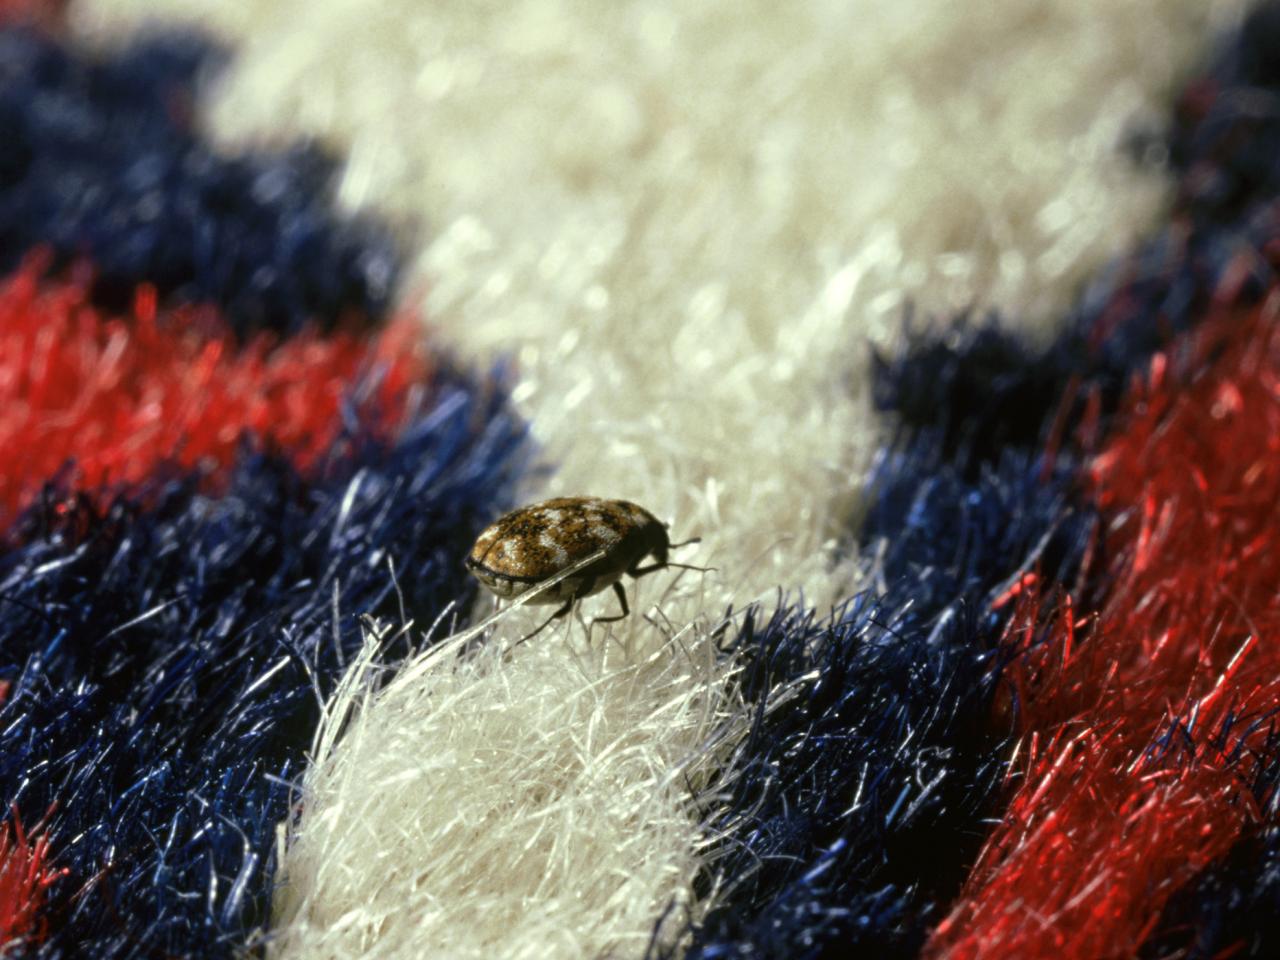 Get Rid of Pesky Carpet Beetles Once and for All!